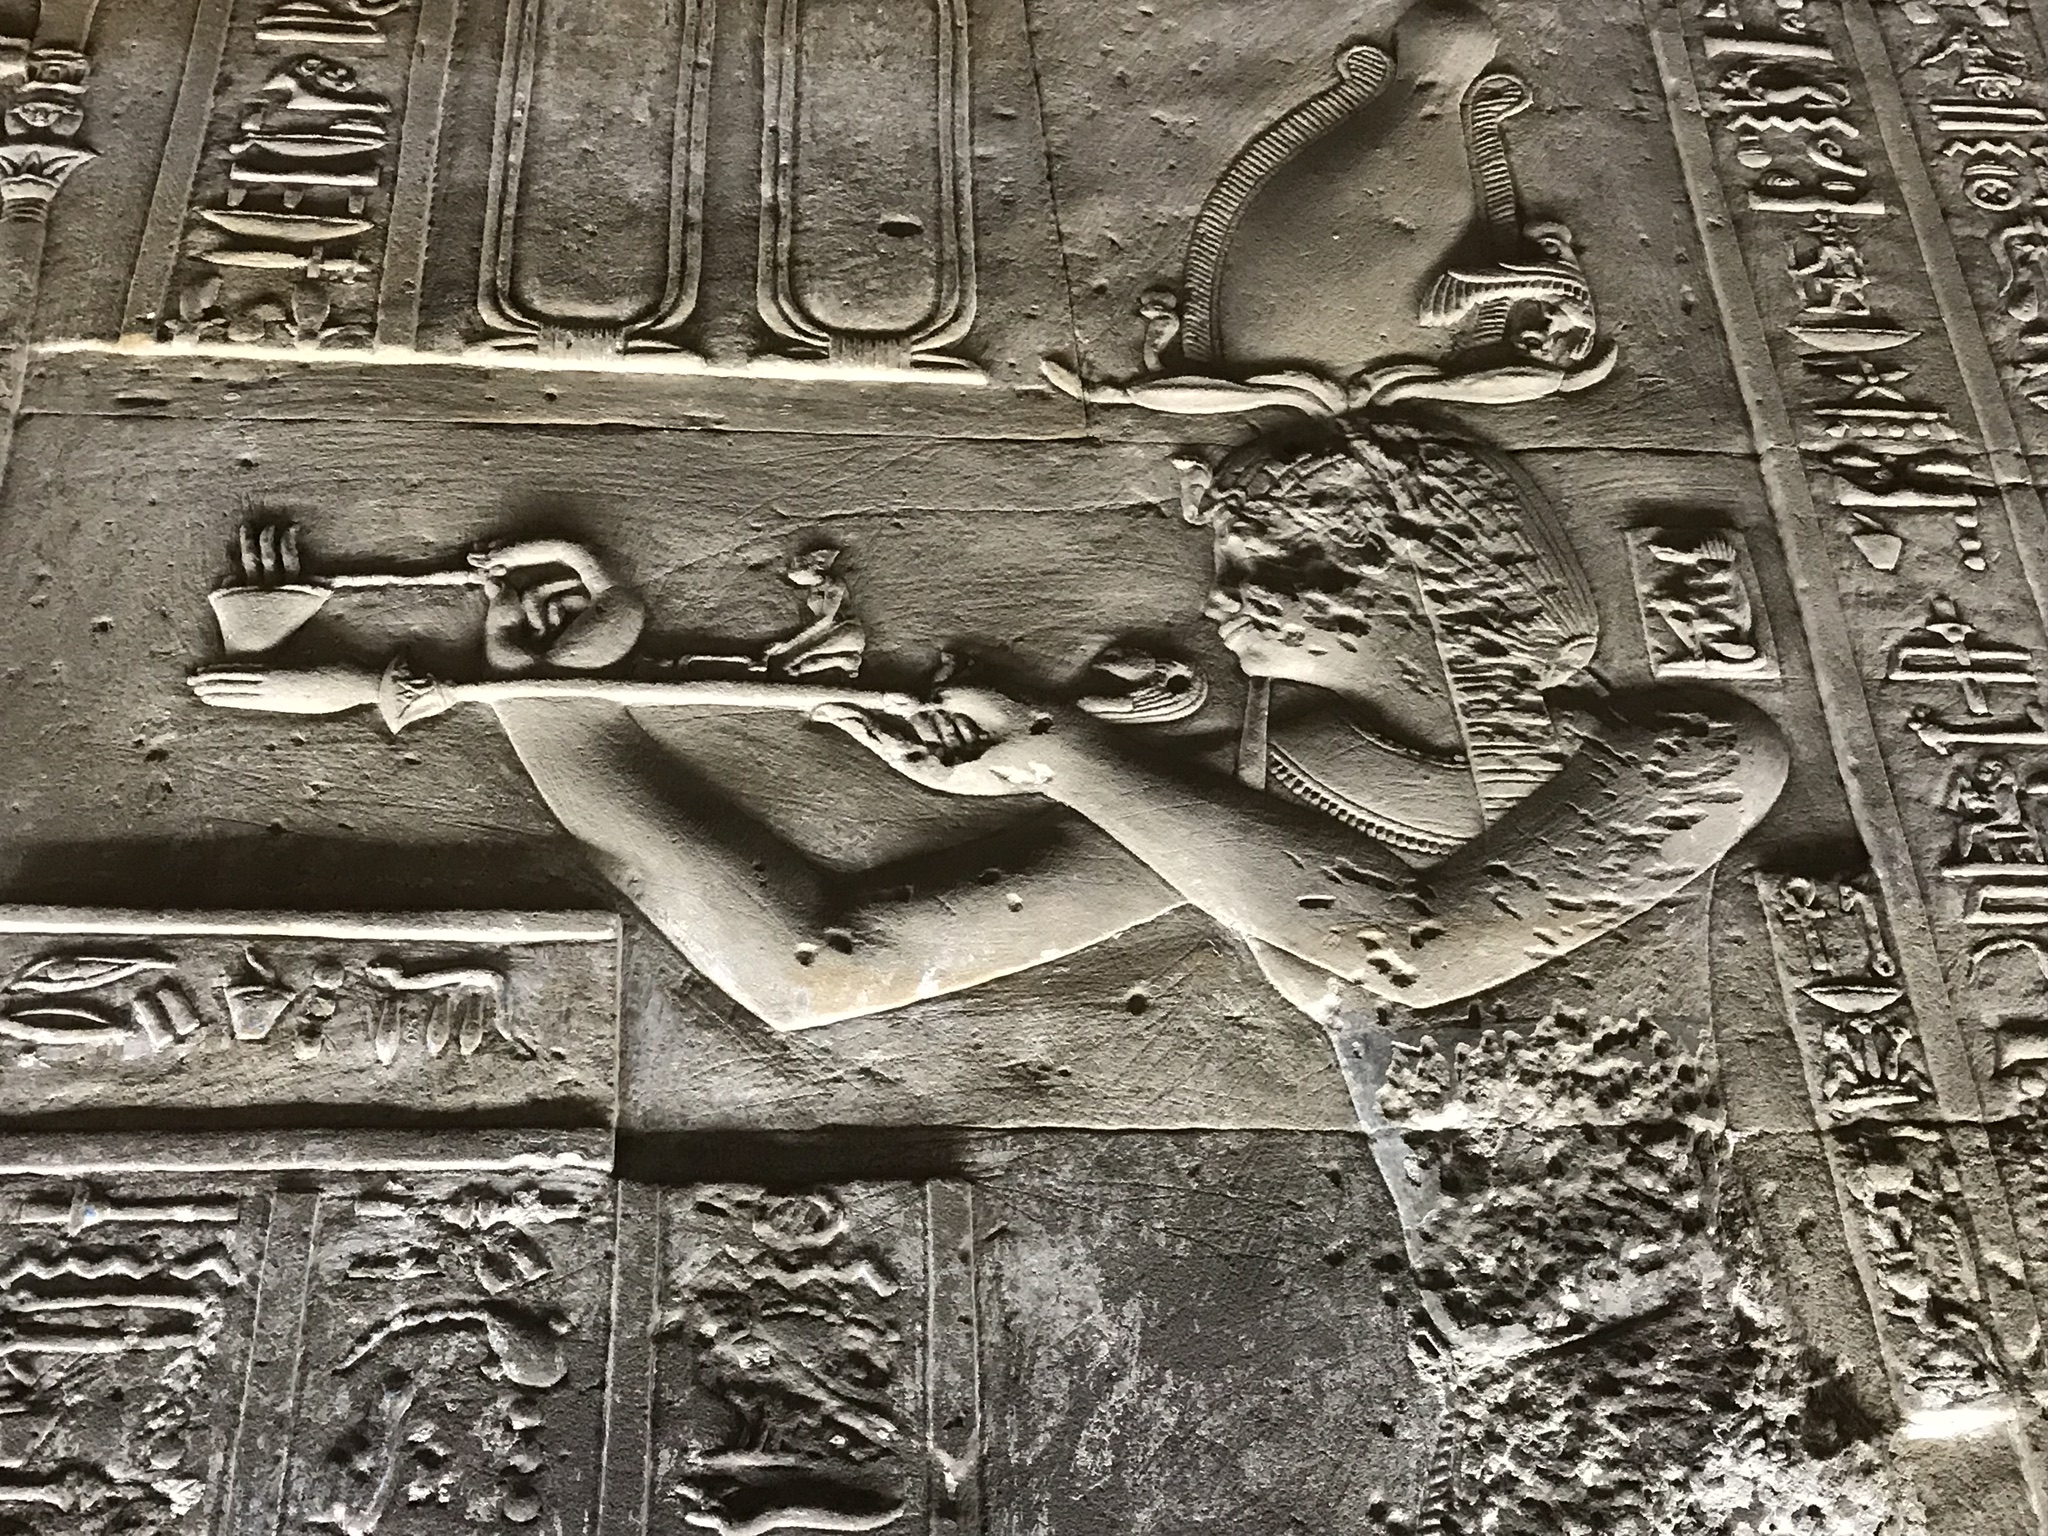 Empty cartouches suggest dynastic struggles of the later Ptolemies. Who's ruling now?